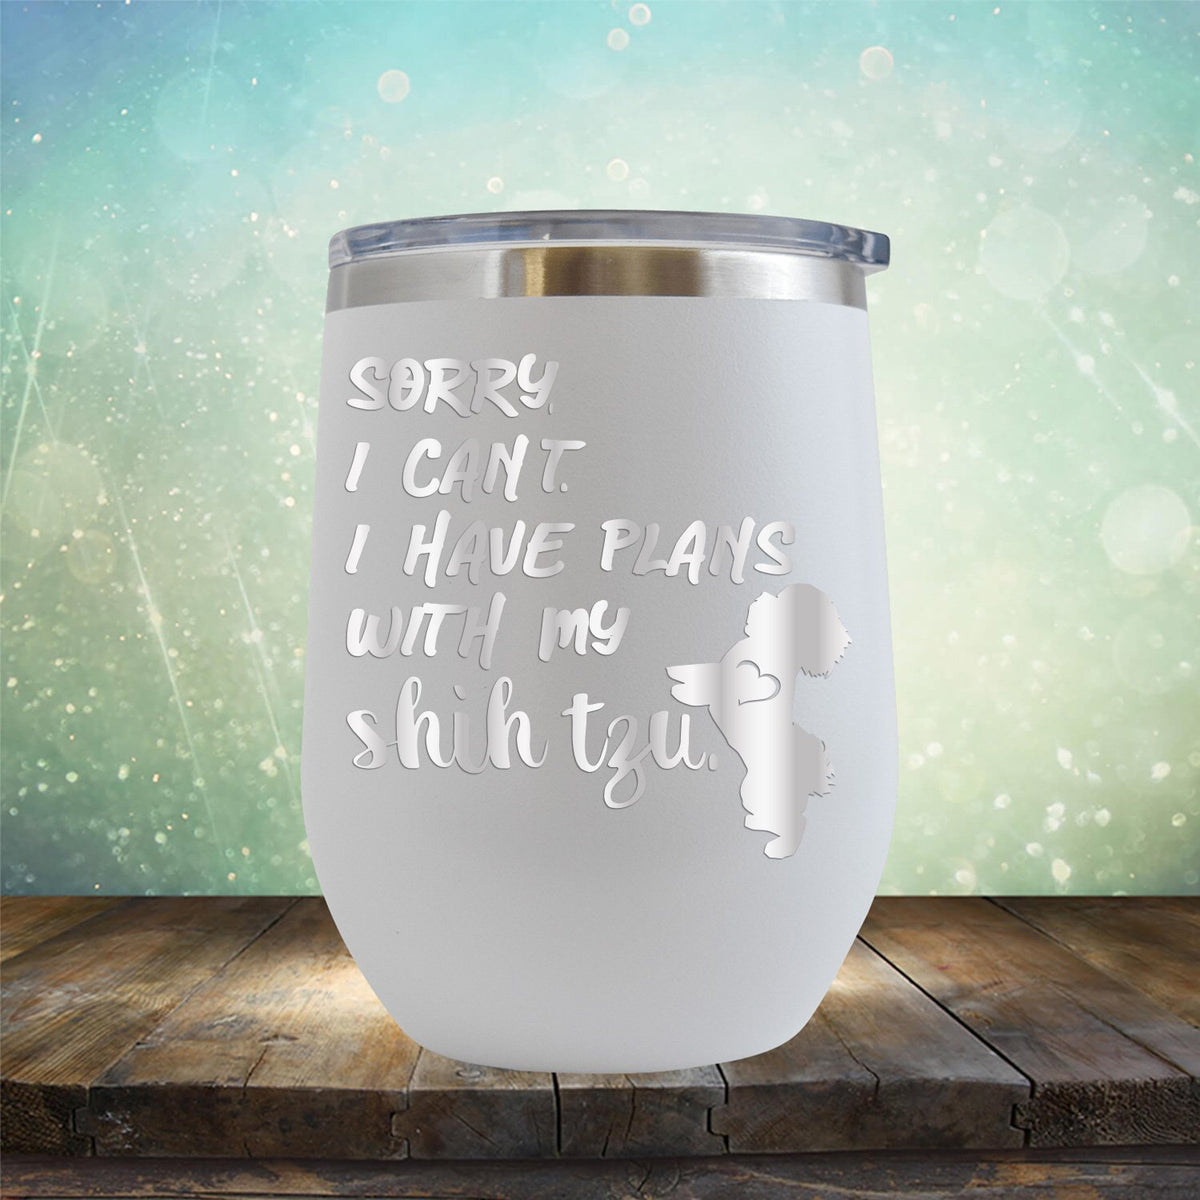 Sorry I Can&#39;t I Have Plans with My Shih Tzu - Stemless Wine Cup